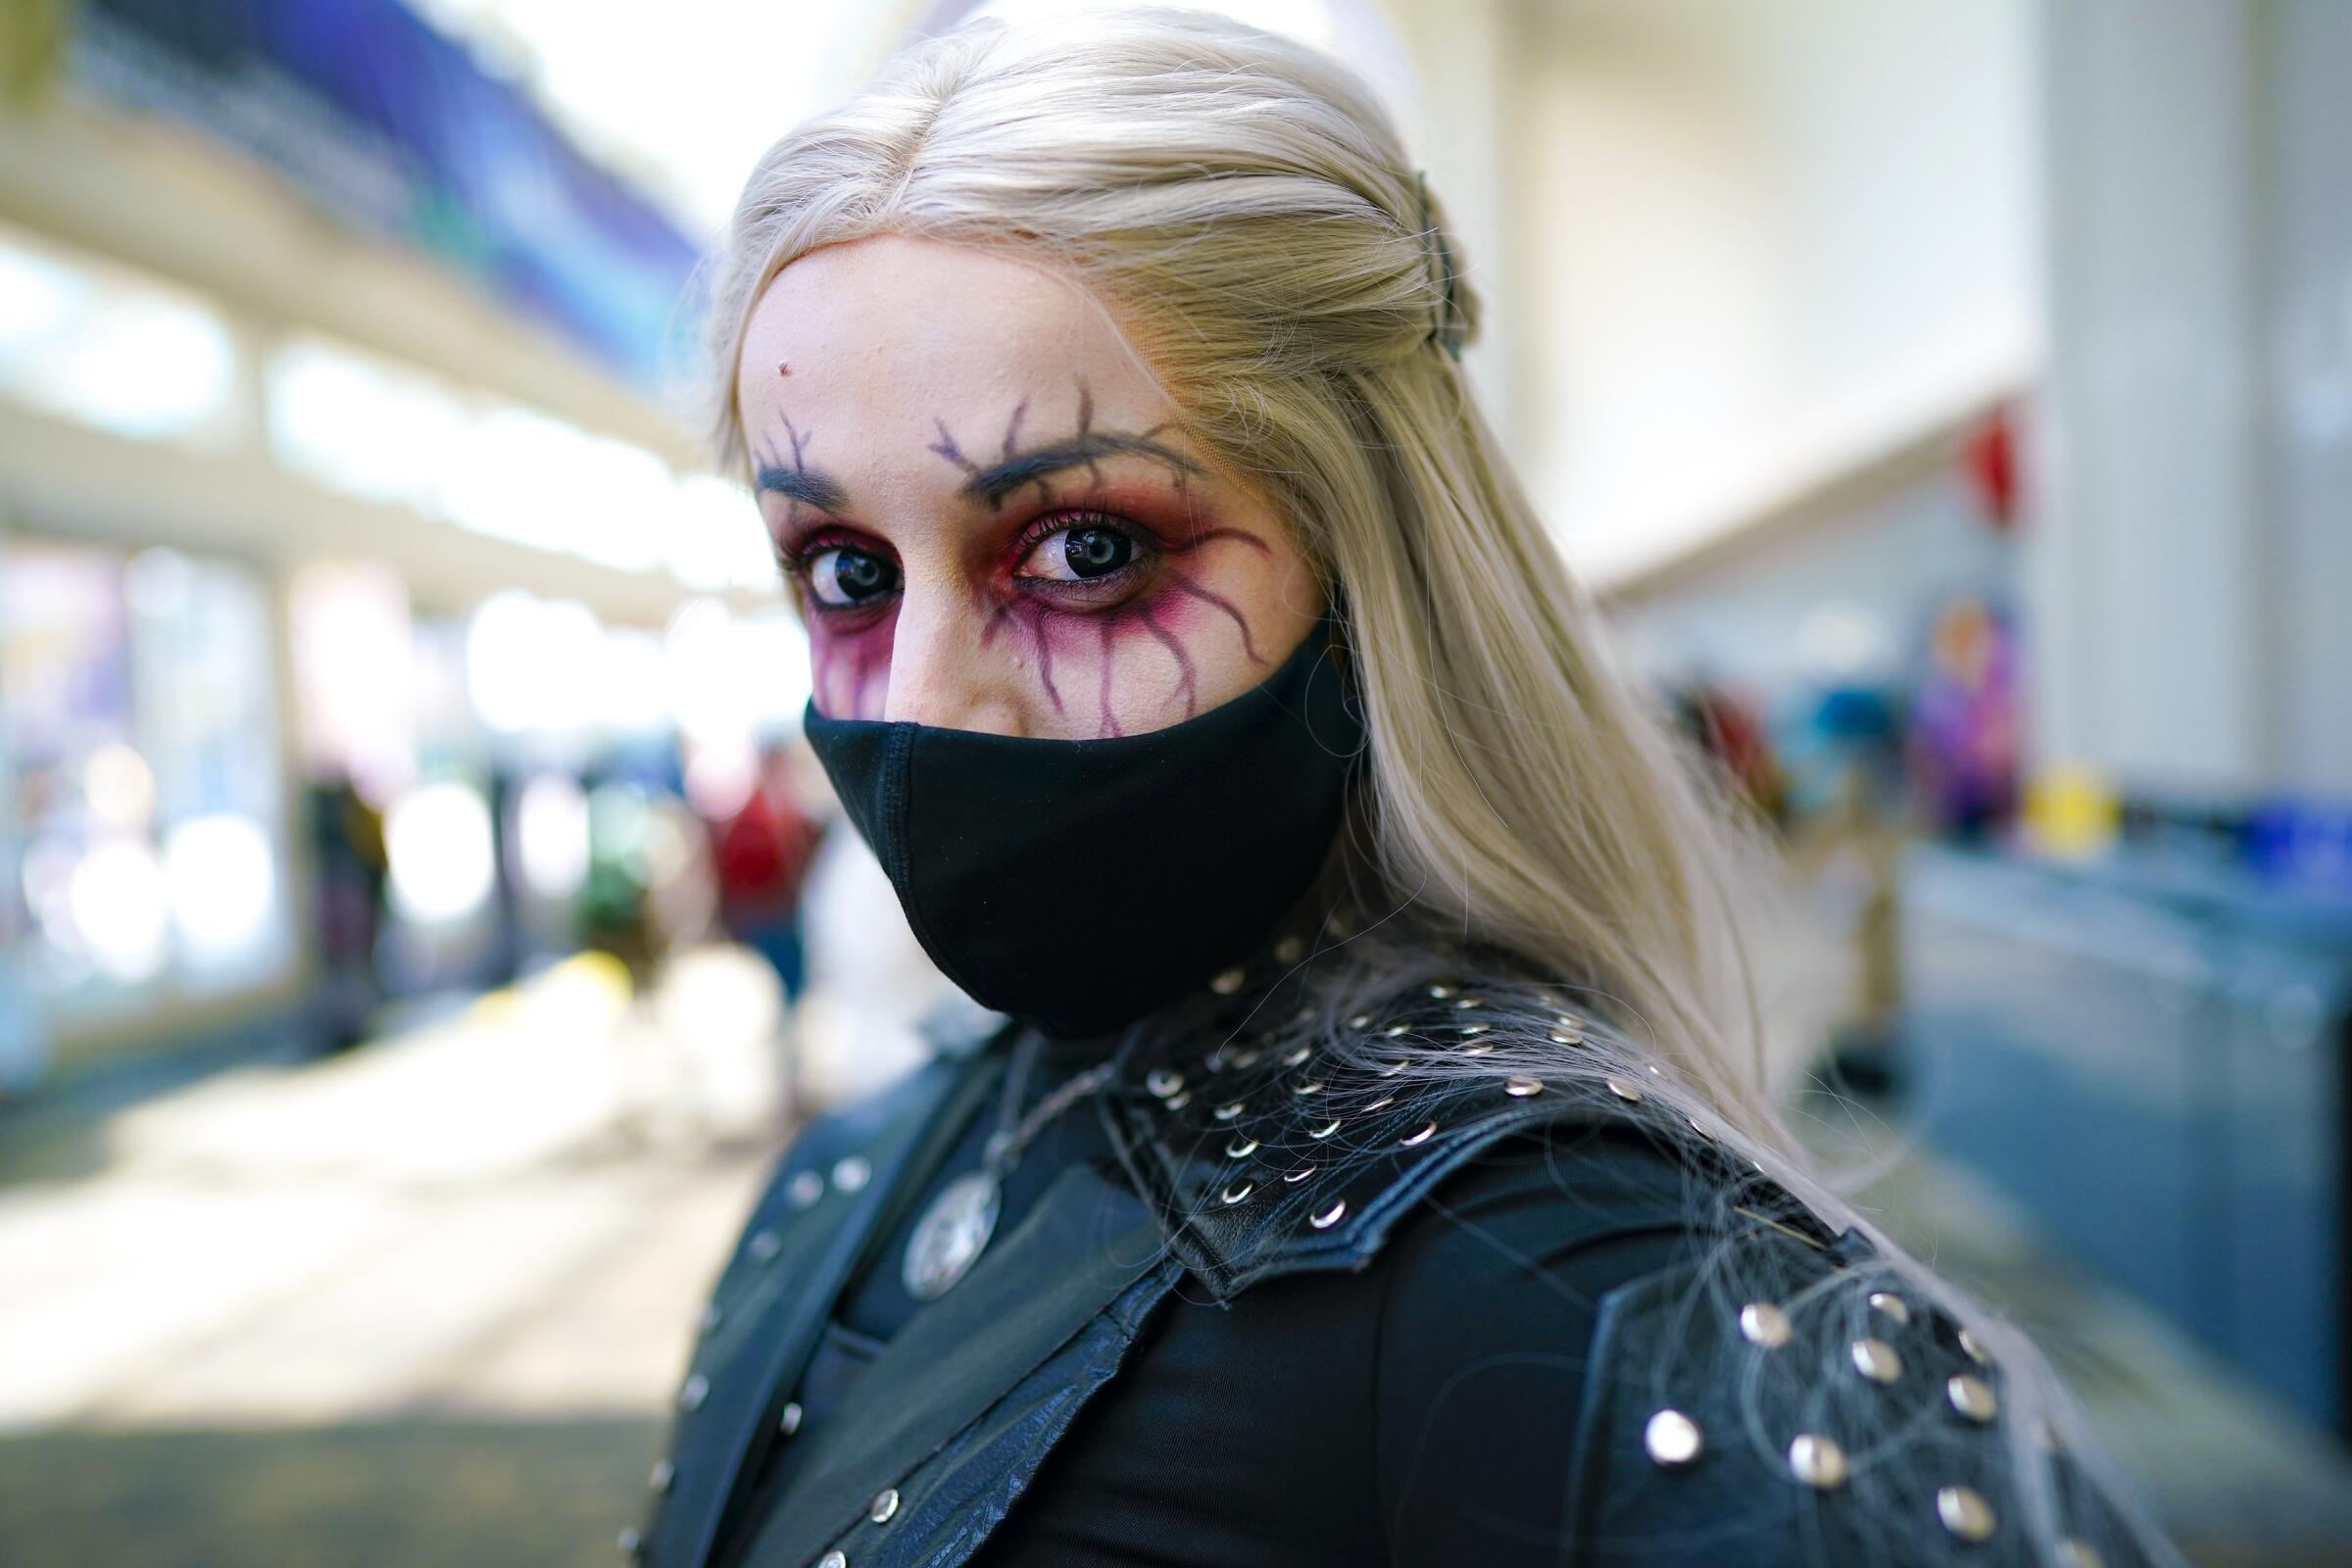 Marina Becker from Sacramento came dressed as Geralt from the Witcher for Comic-Con 2022.